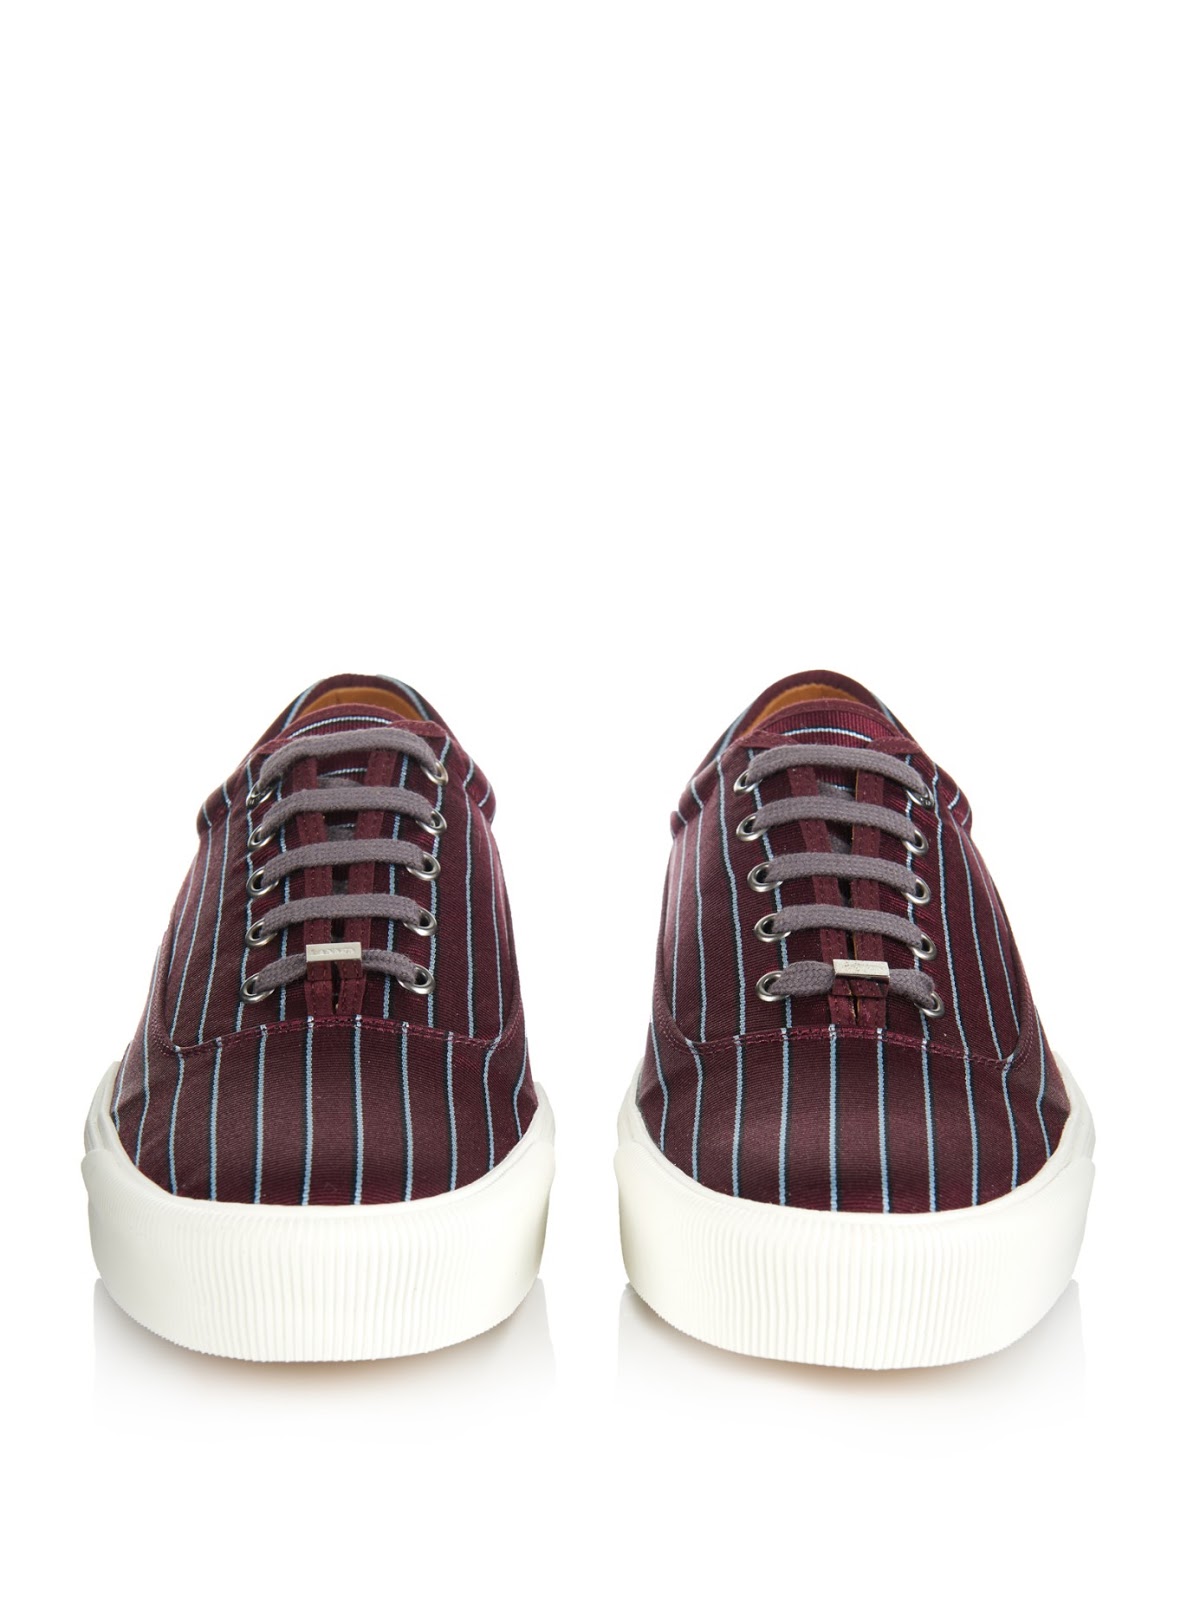 Sweet Stripes: Lanvin Striped Woven Silk Low-Top Trainers | SHOEOGRAPHY